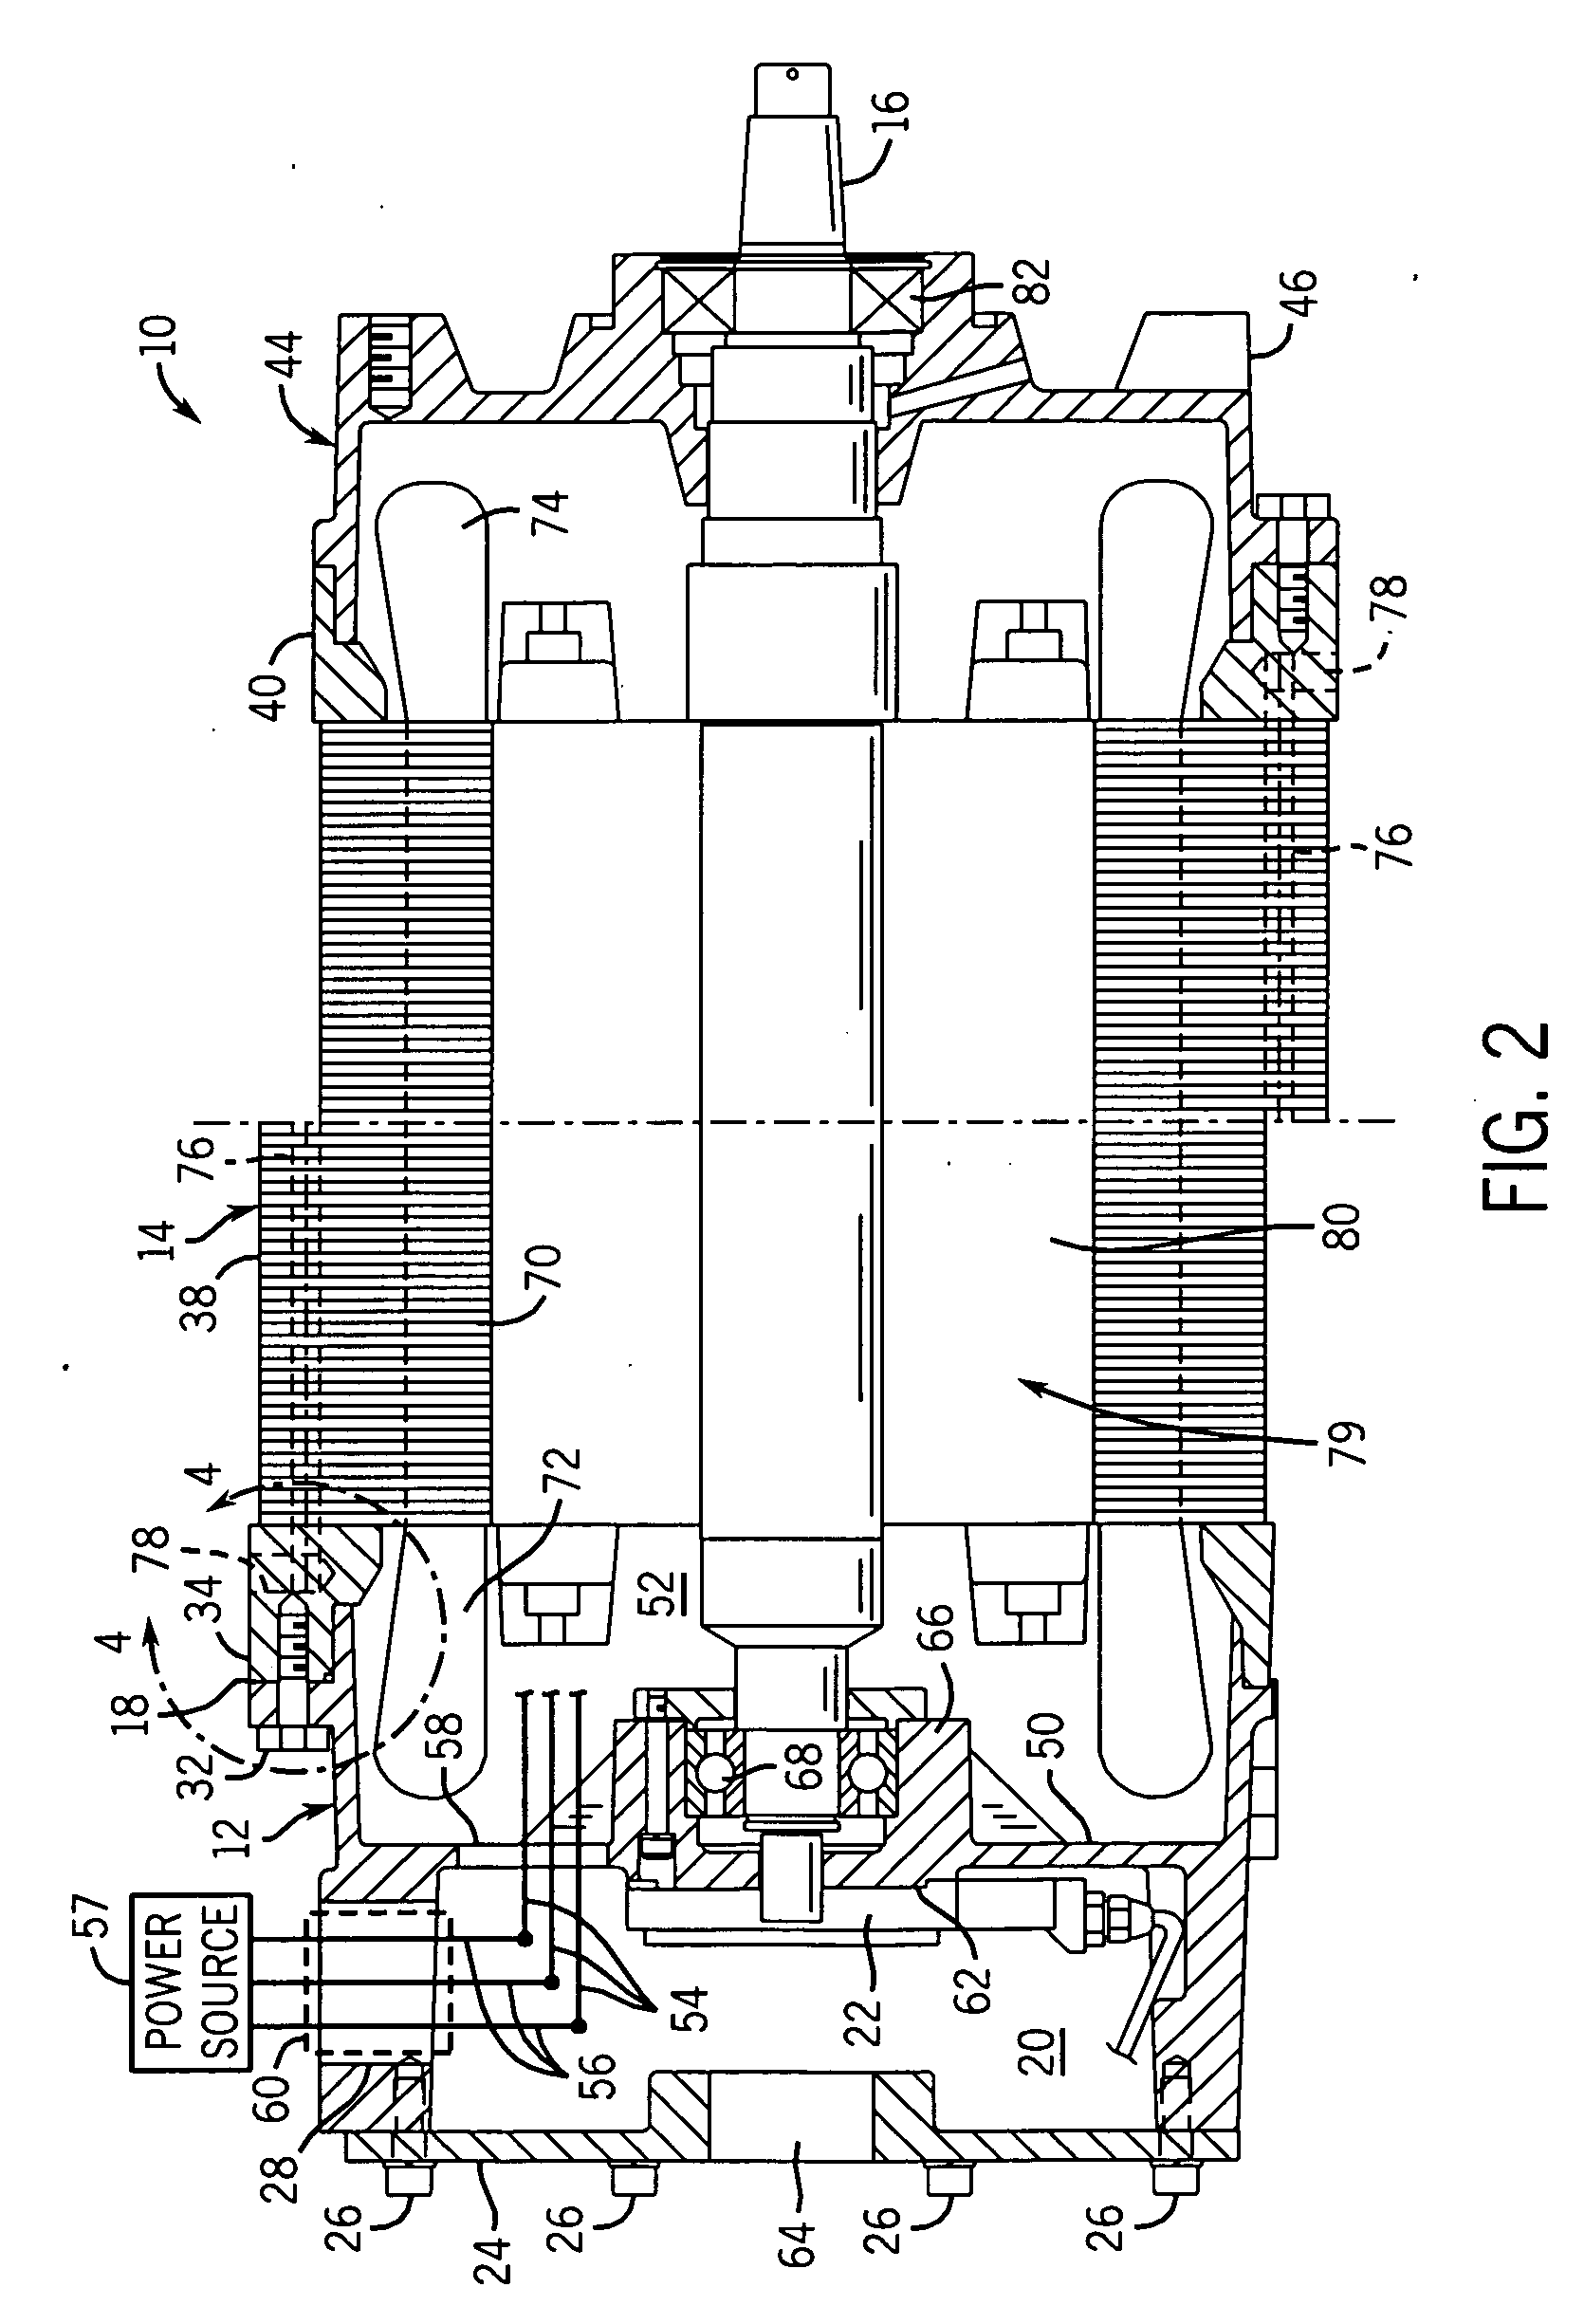 Explosion-proof motor with integrated sensor/lead housing